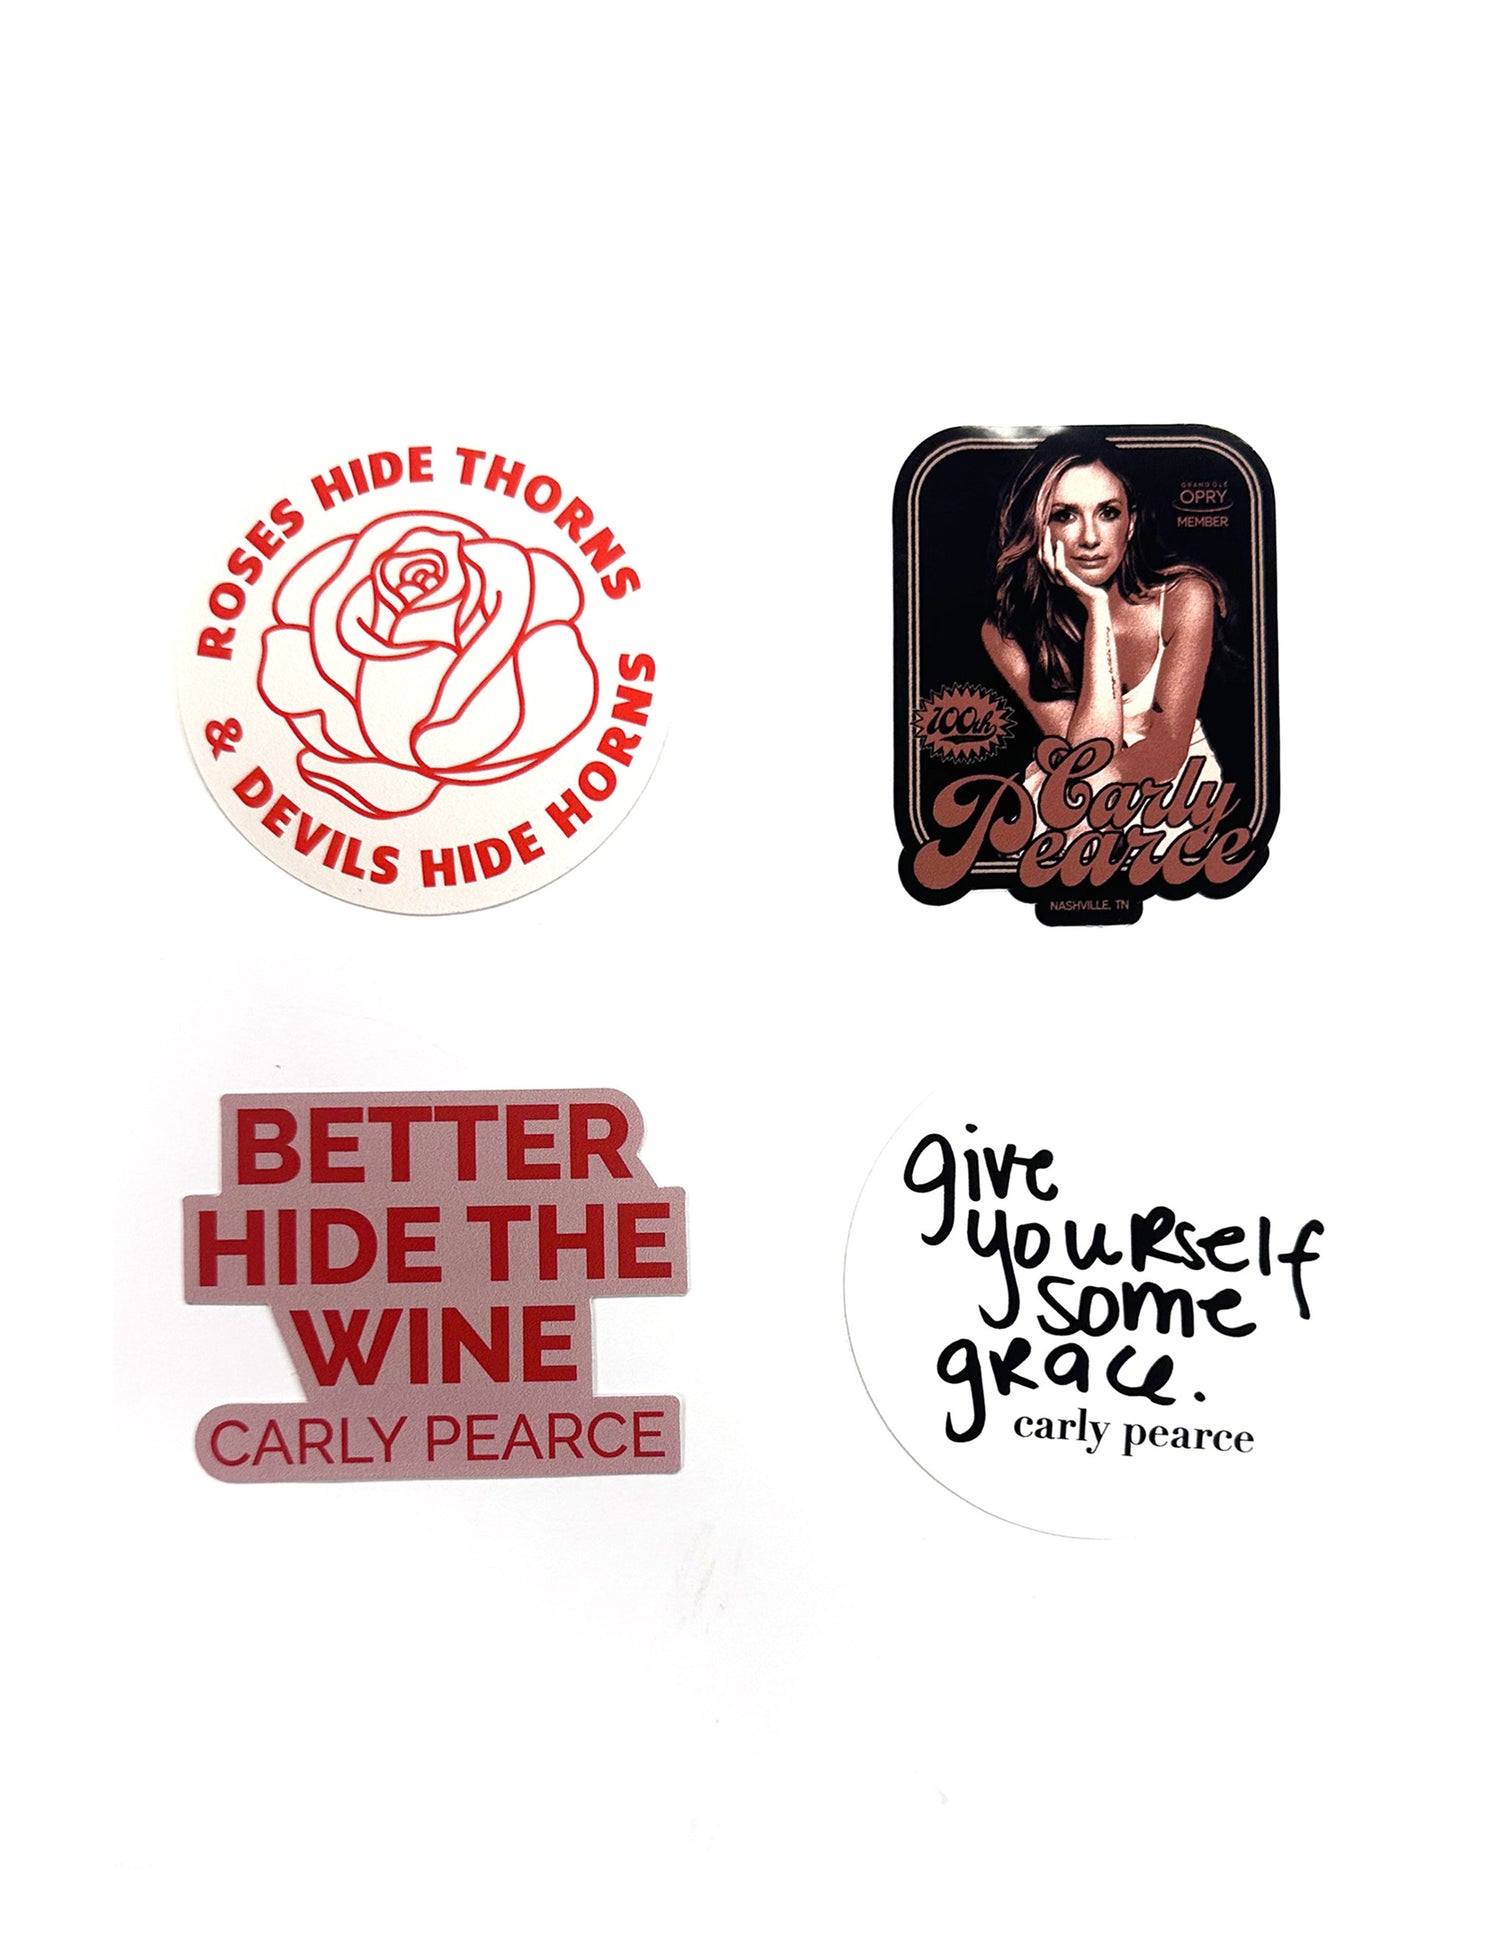 Carly Pearce Opry Exclusive 4 Piece Sticker Pack